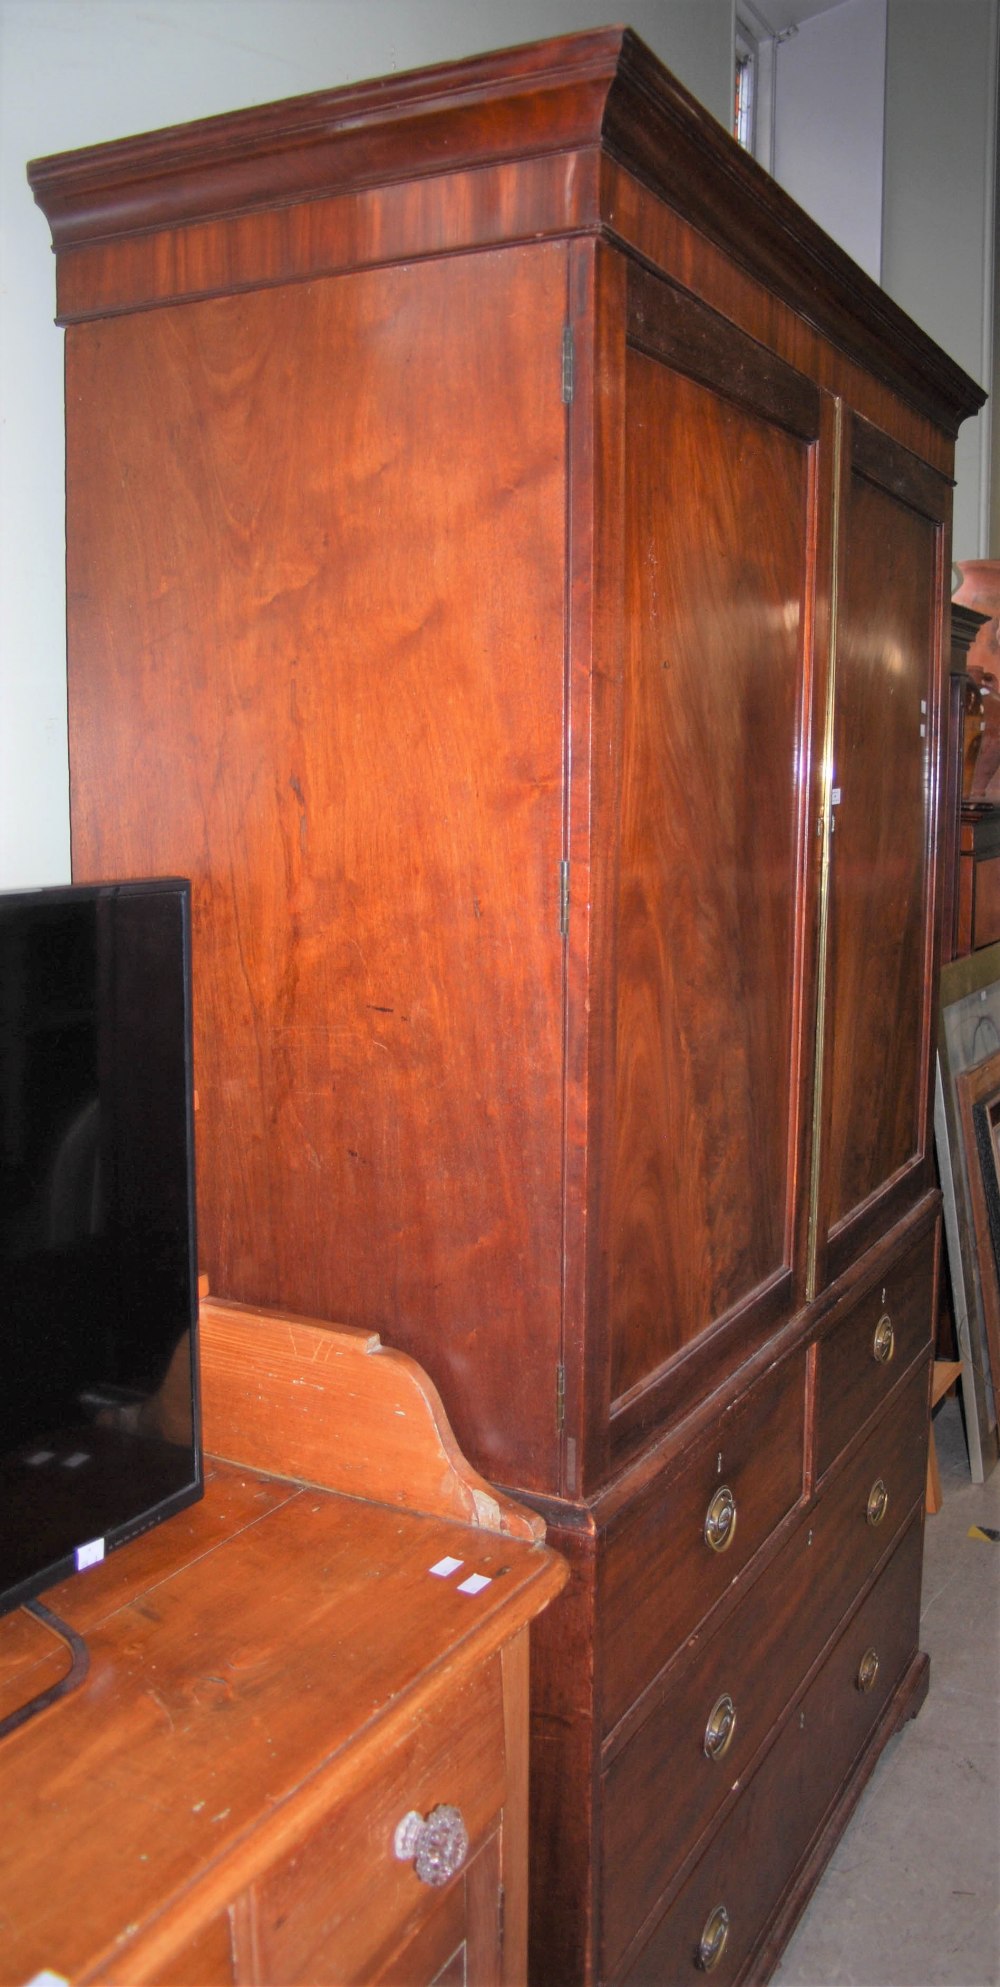 AN ANTIQUE MAHOGANY LINEN PRESS, THE TOP WITH TWO CUPBOARD DOORS OPENING TO THREE SLIDING SHELVES,